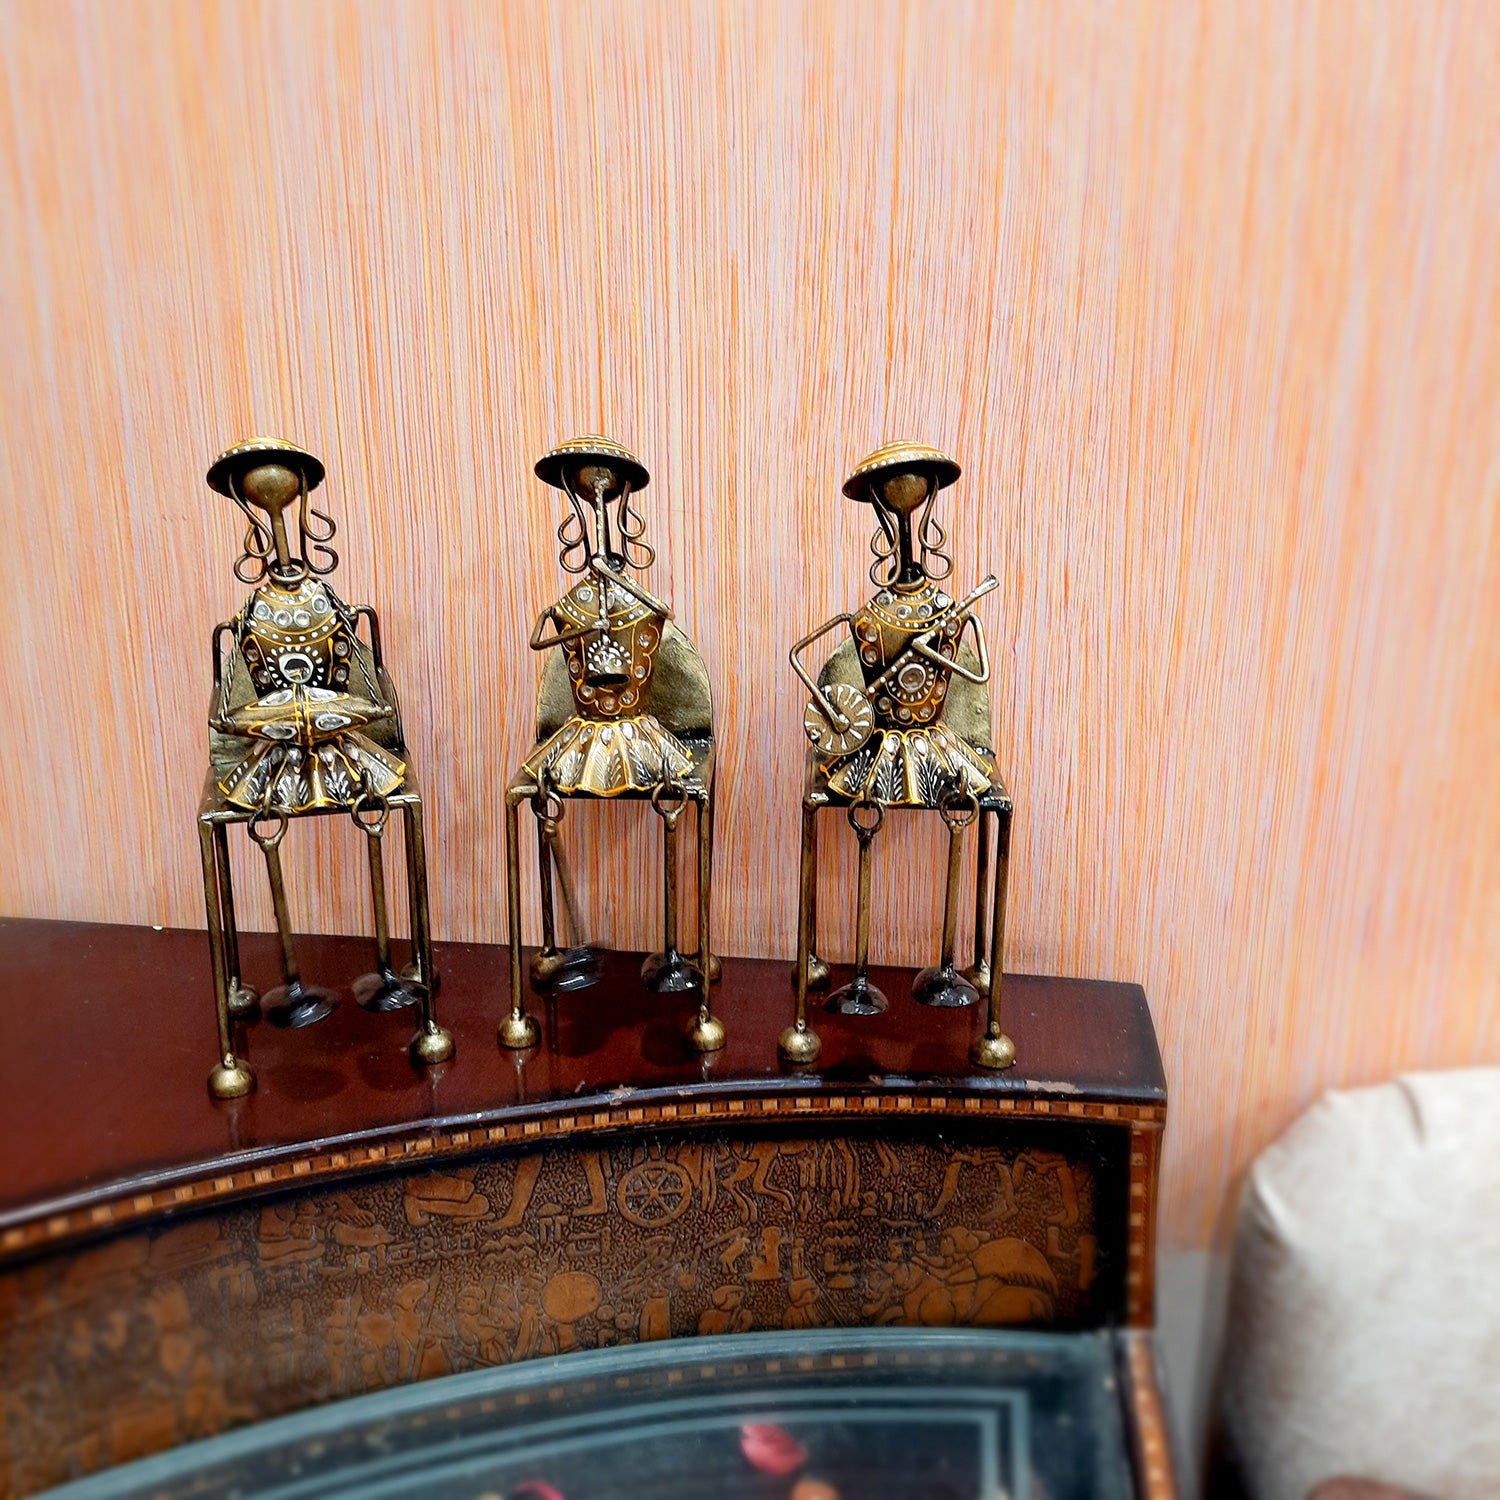 Figurine Showpiece - Musicians Sitting On Chair With Hanging Legs | Artifacts for Home, Table, Living Room, TV Unit & Bedroom Decor | Decorative Show piece for Office Desk & Gifts - 12 Inch (Set of 3) - Apkamart